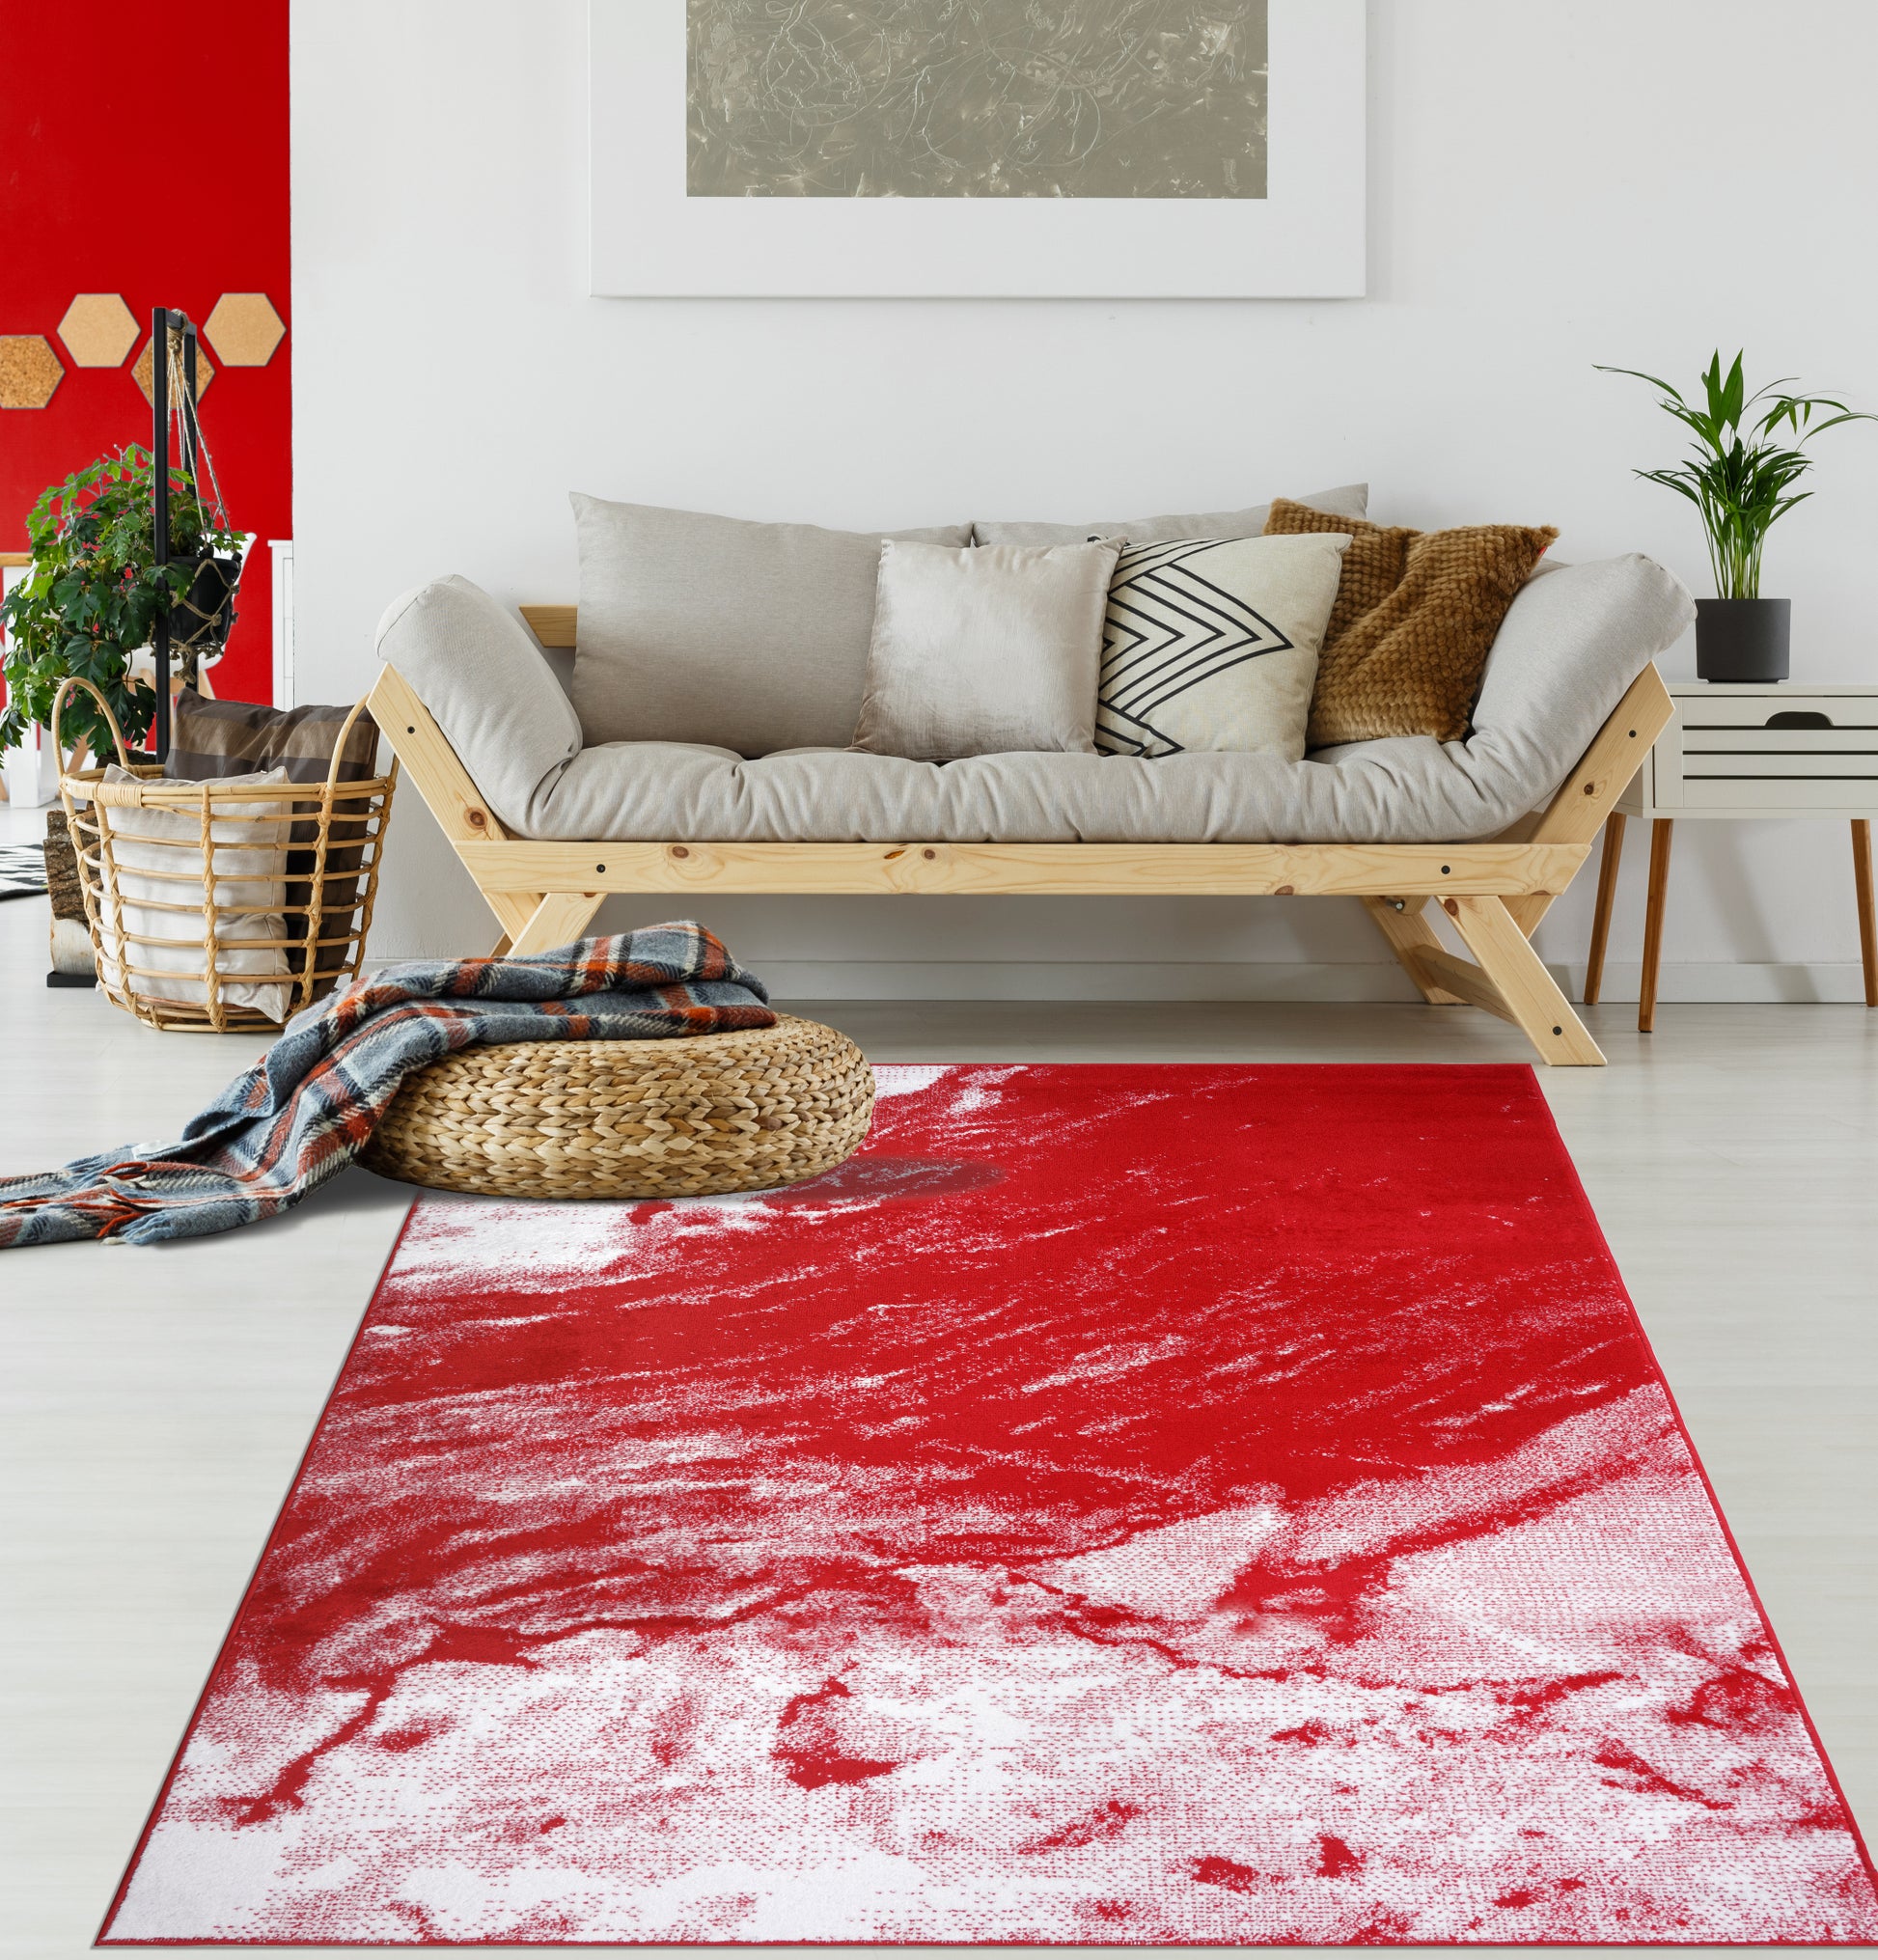 red abstract rustic modern marble pattern area rug 4x6, 4x5 ft Small Carpet, Home Office, Living Room, Bedroom